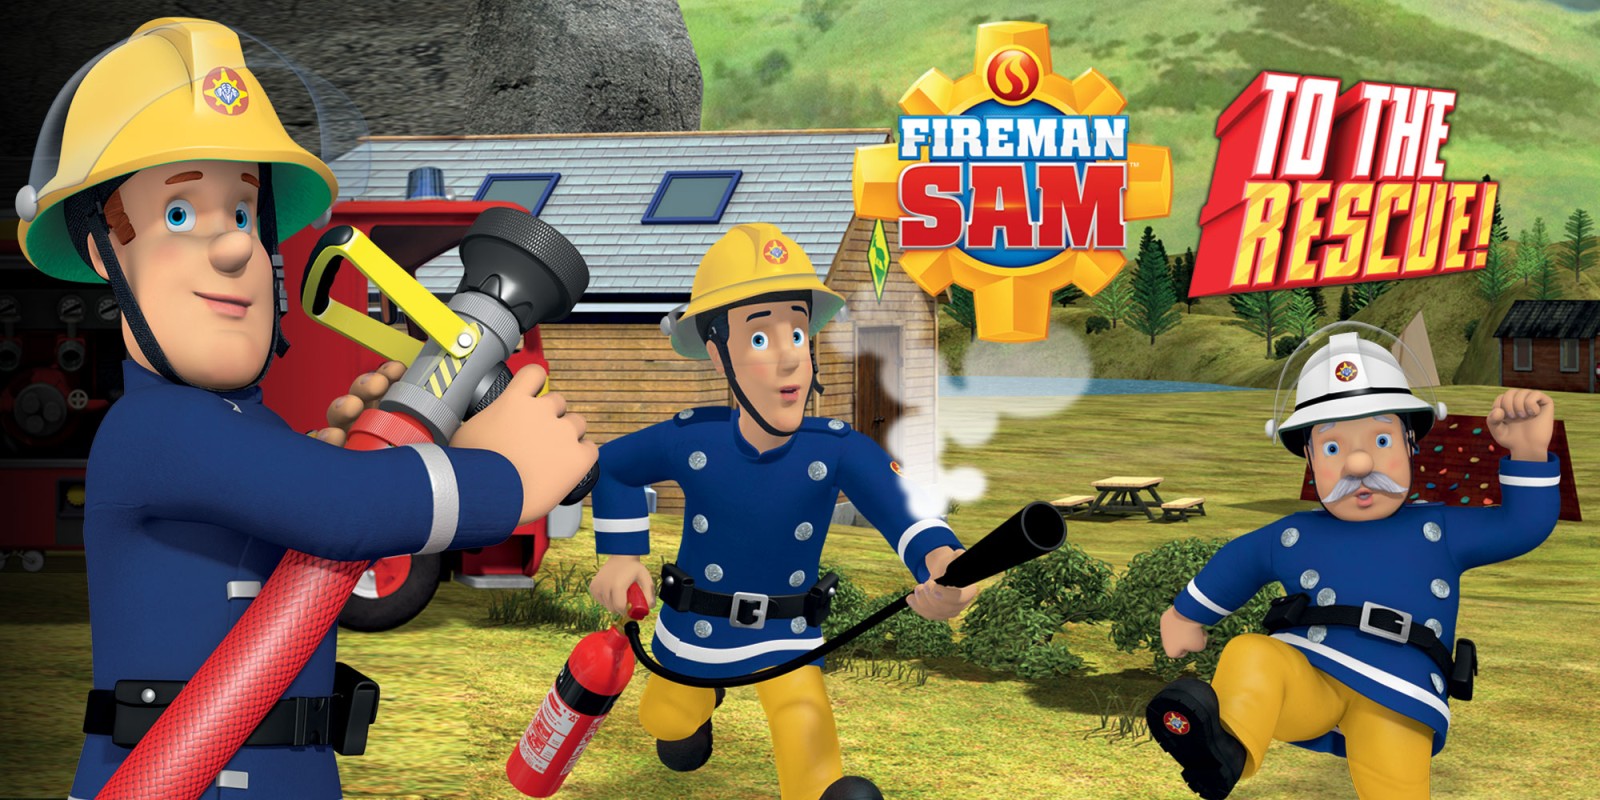 Fireman Sam To The Rescue